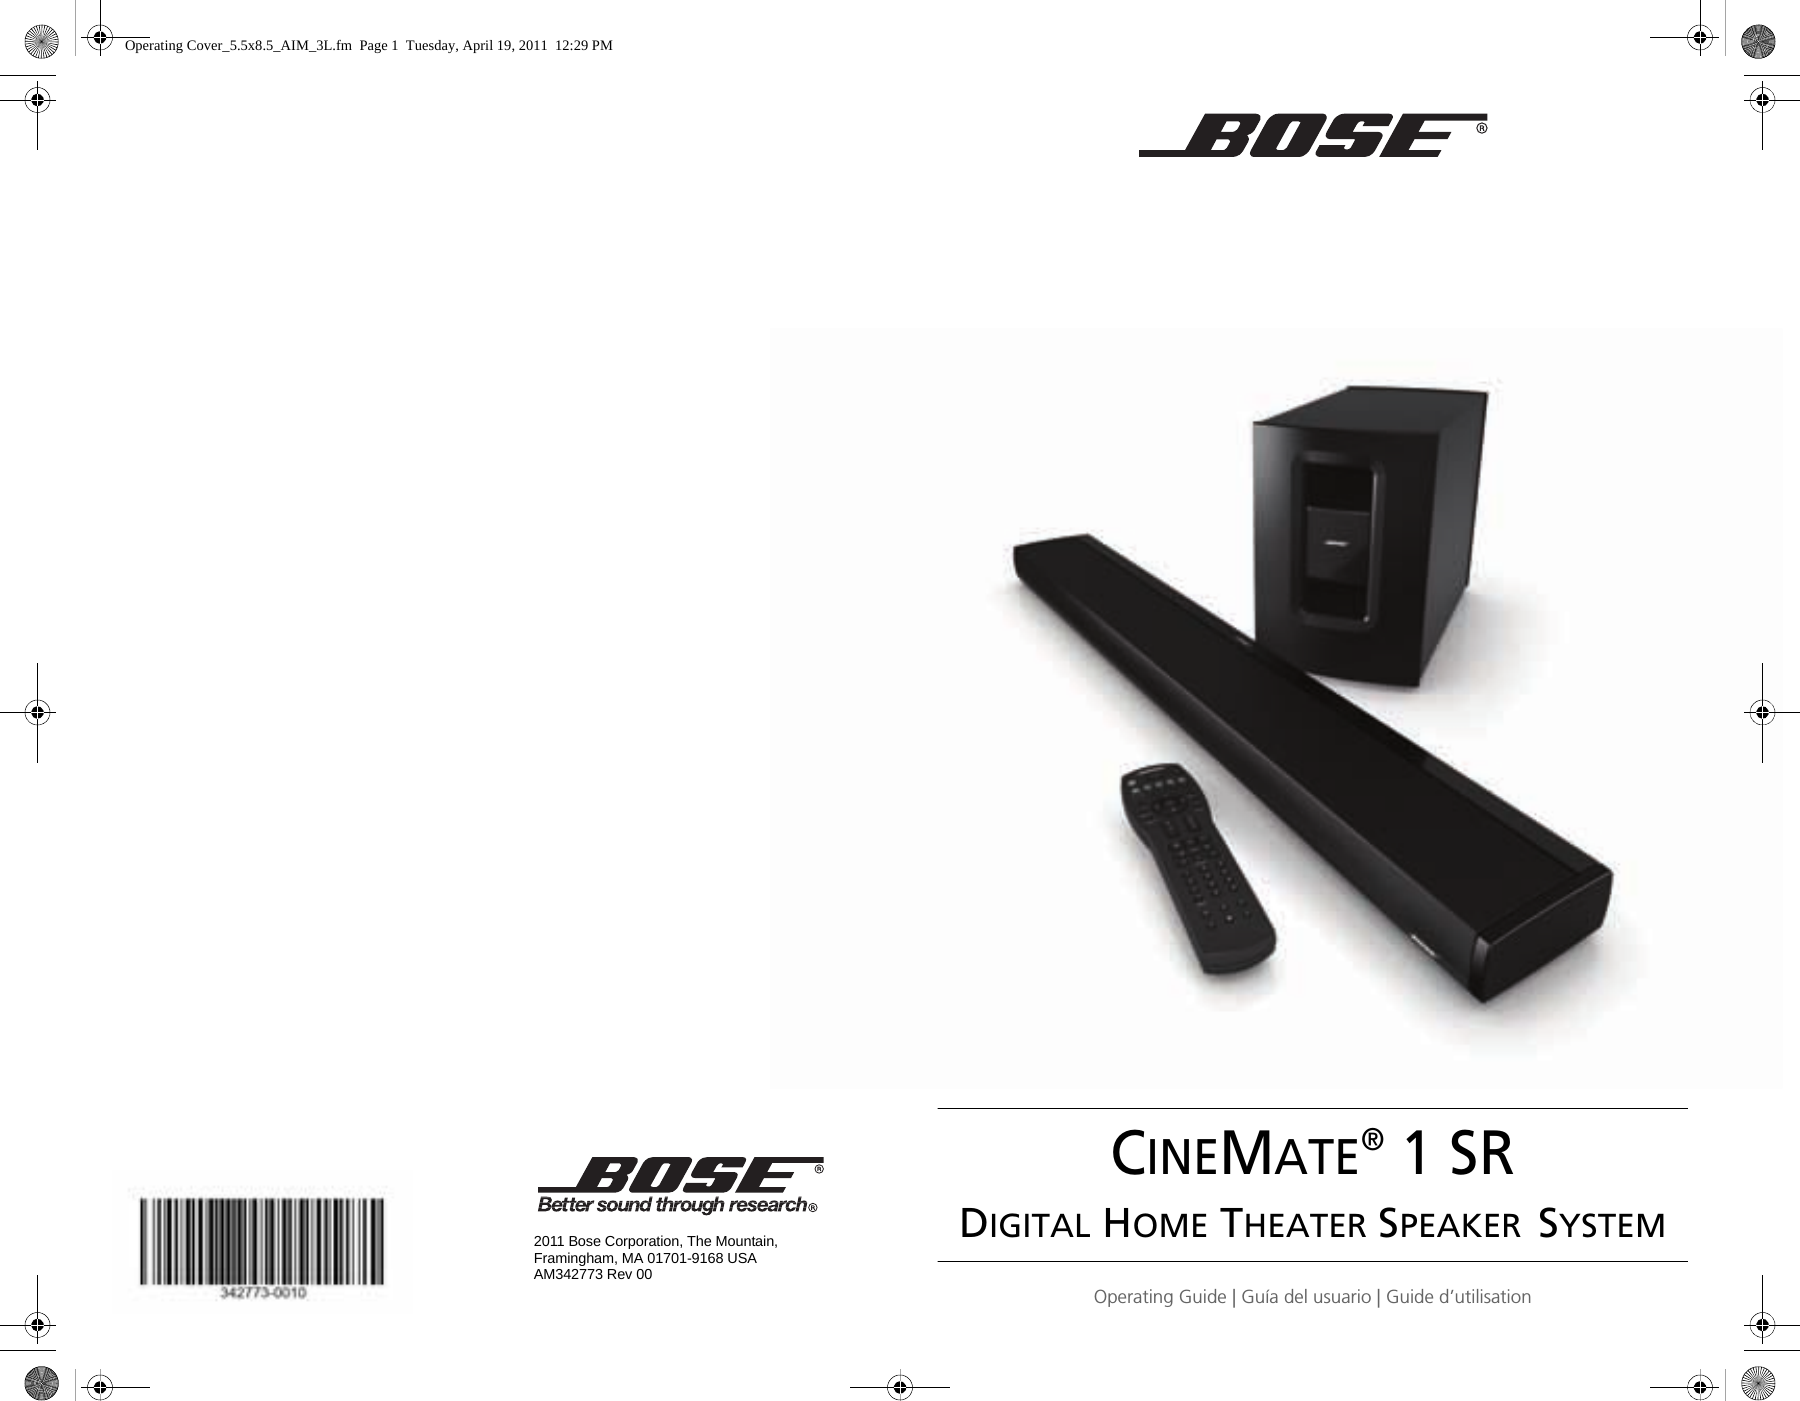 CINEMATE® 1 SRDIGITAL HOME THEATER SPEAKER SYSTEMOperating Guide | Guía del usuario | Guide d’utilisation2011 Bose Corporation, The Mountain,Framingham, MA 01701-9168 USAAM342773 Rev 00Operating Cover_5.5x8.5_AIM_3L.fm  Page 1  Tuesday, April 19, 2011  12:29 PM